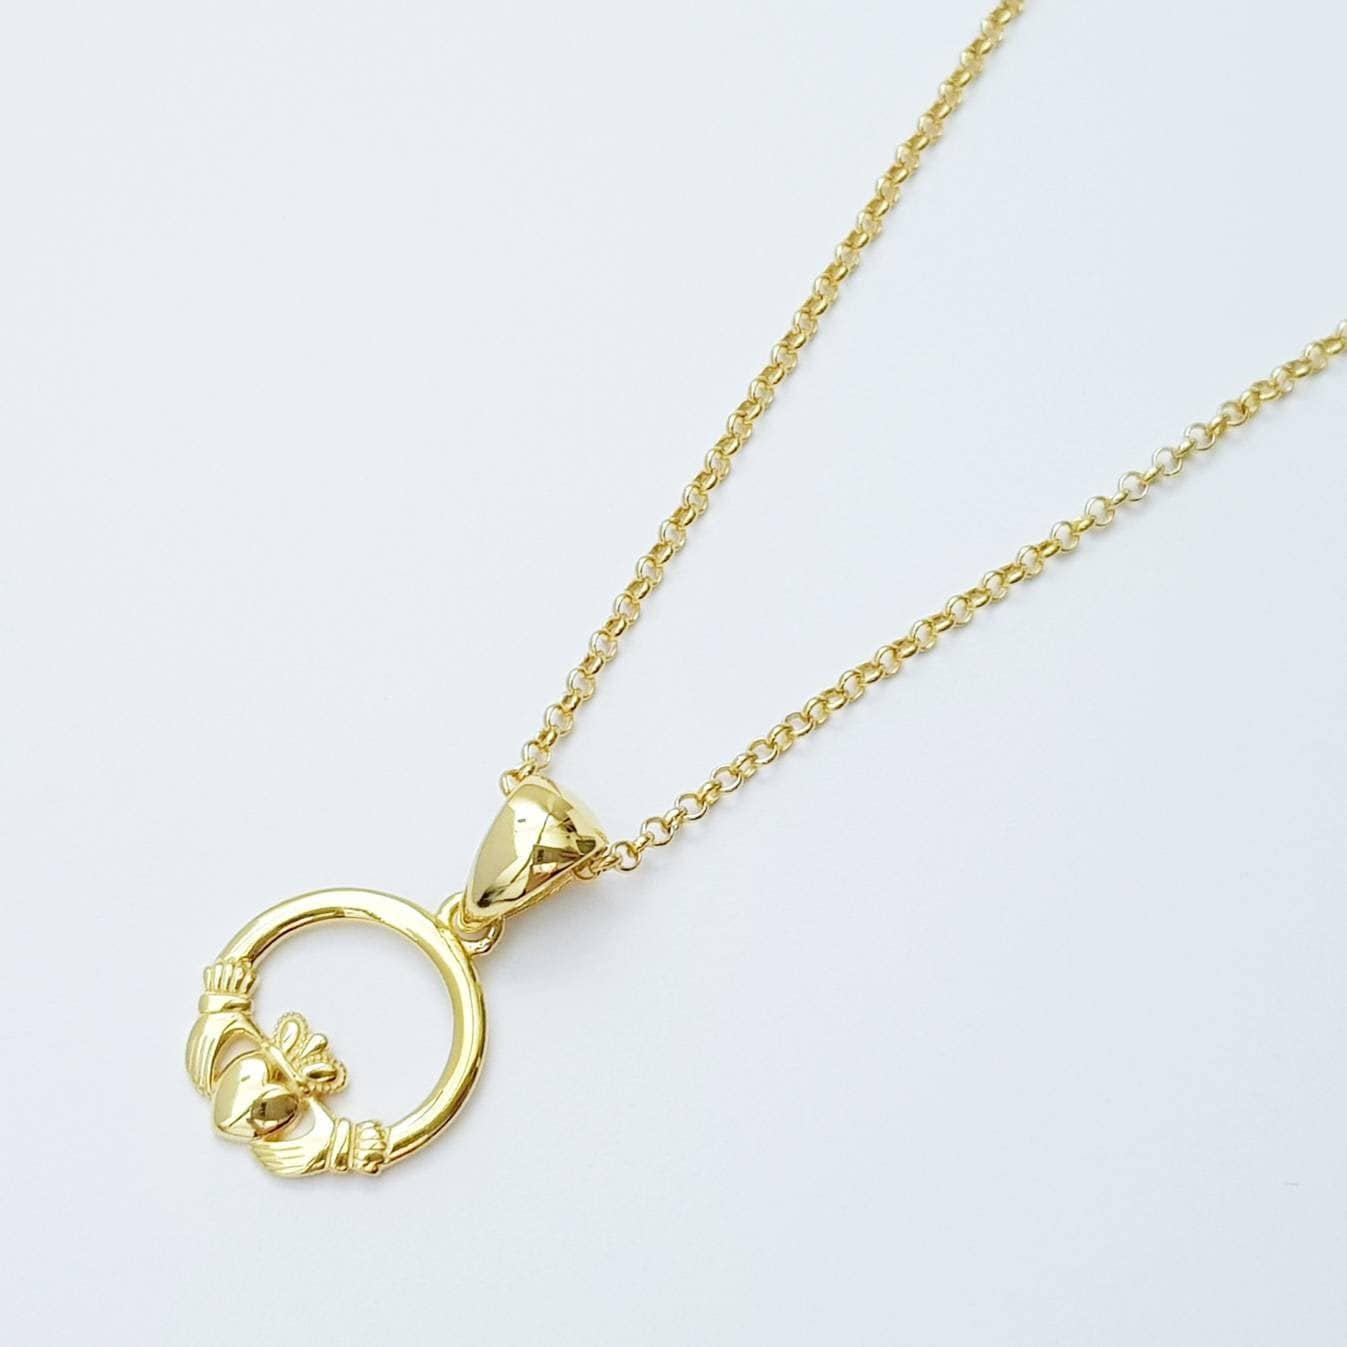 Small gold plated Claddagh pendant, Irish claddagh necklace from Galway, Ireland, Sterling Silver claddagh necklace